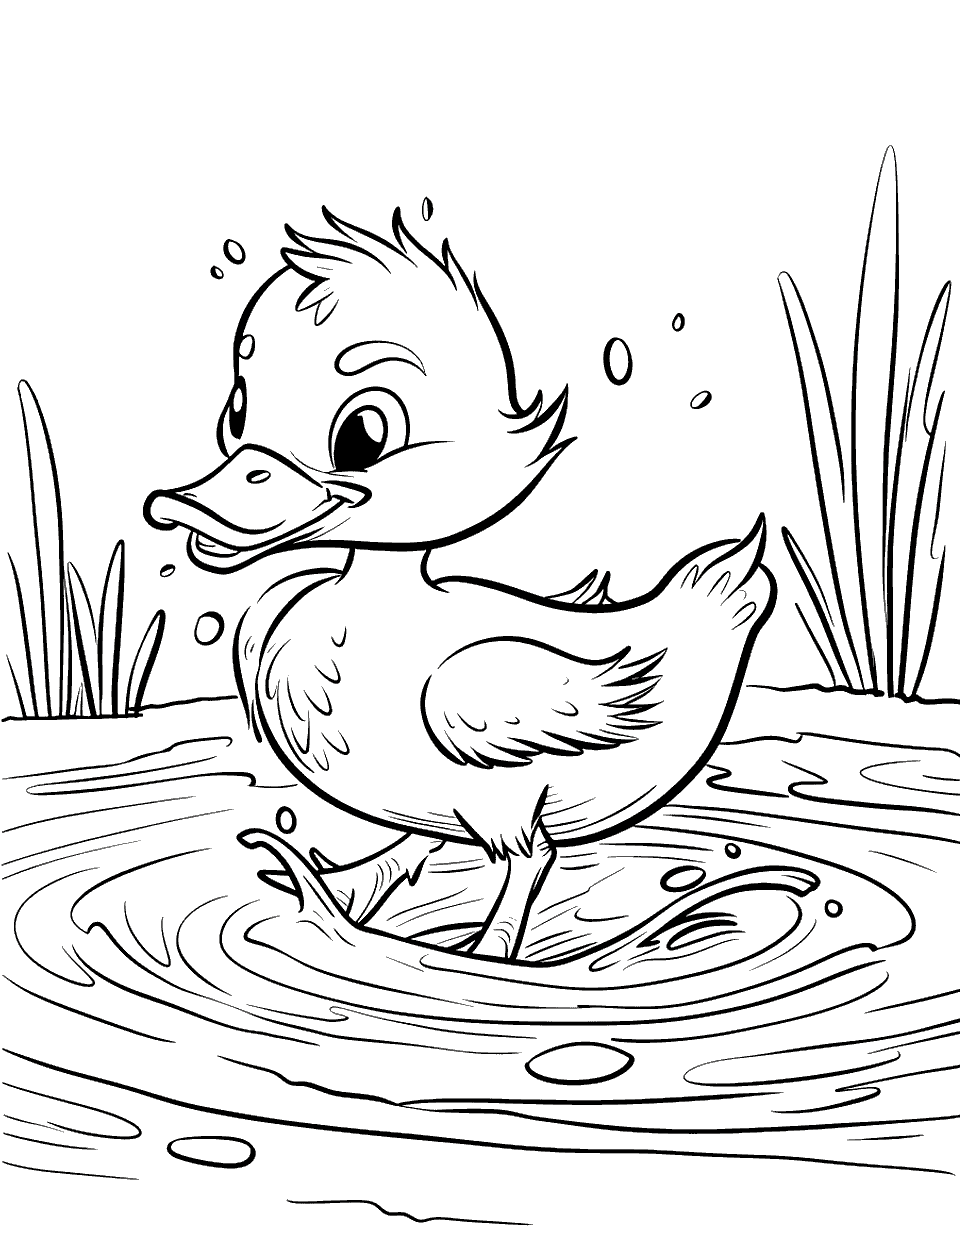 Baby Duck Splashing in a Pond Coloring Page - A cheerful baby duck splashing around in a small pond with ripples around it.